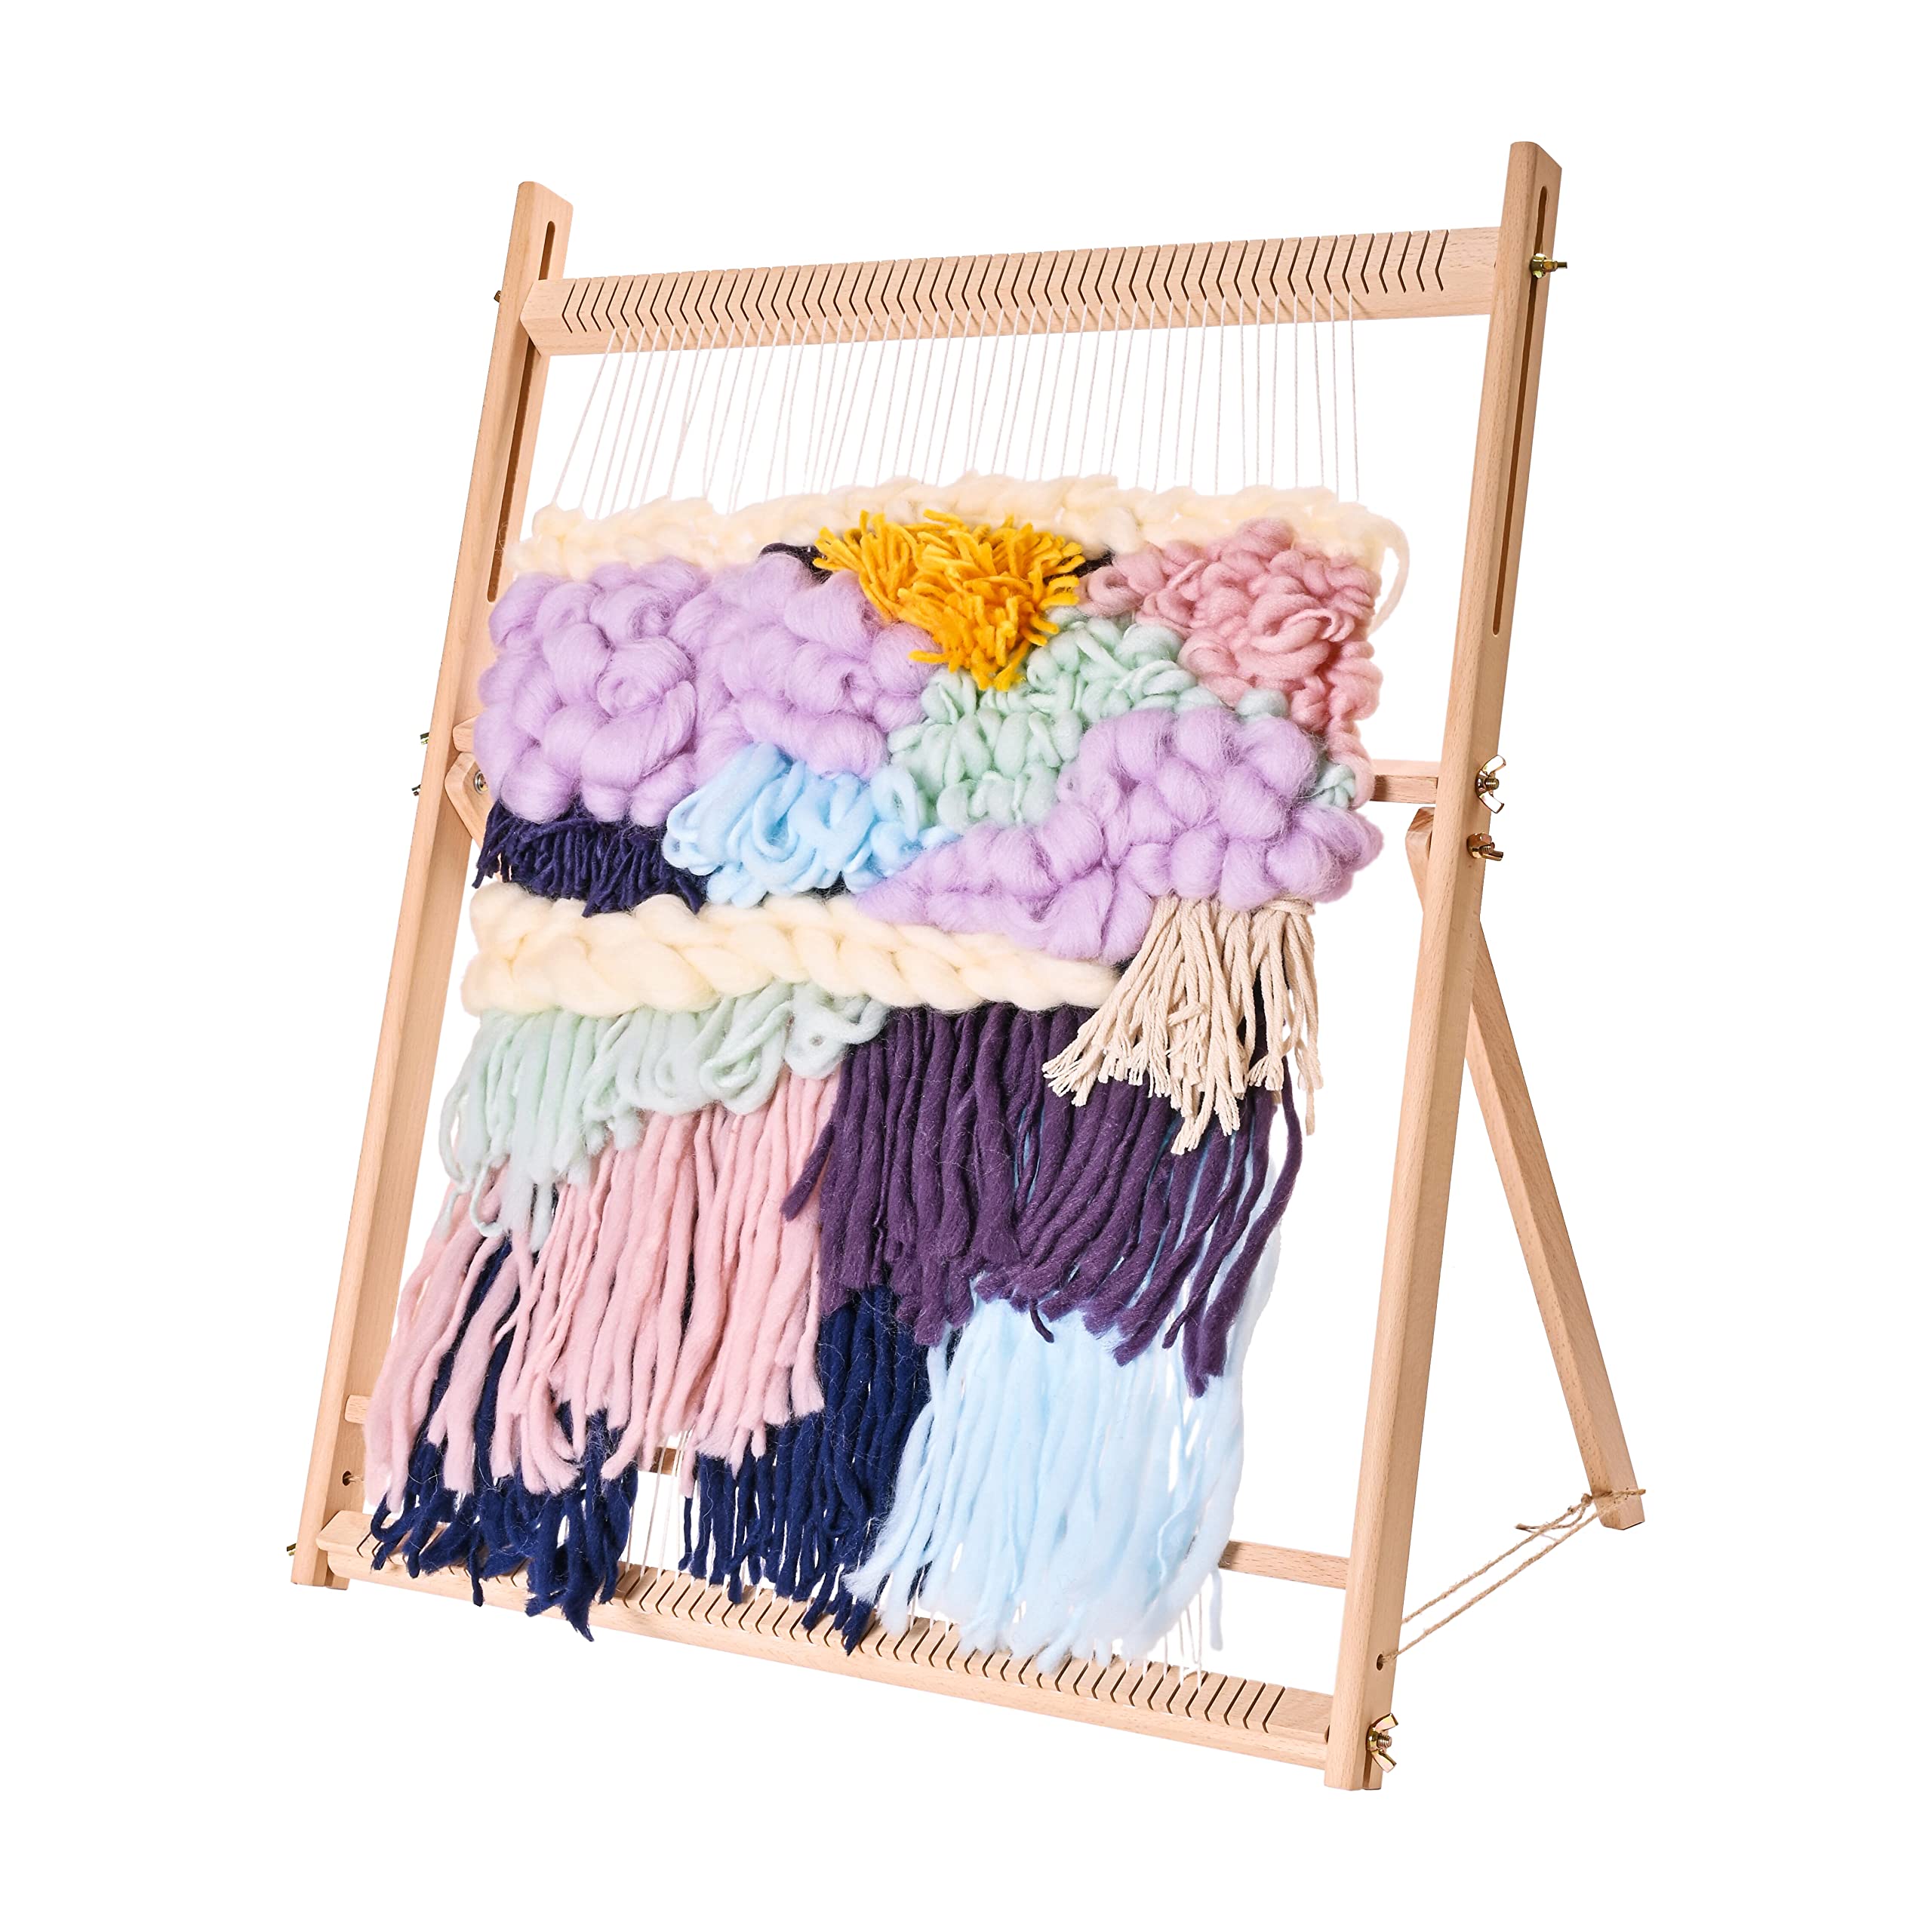 Lap Loom Weaving Kit with yarn and accessories! Made in the USA